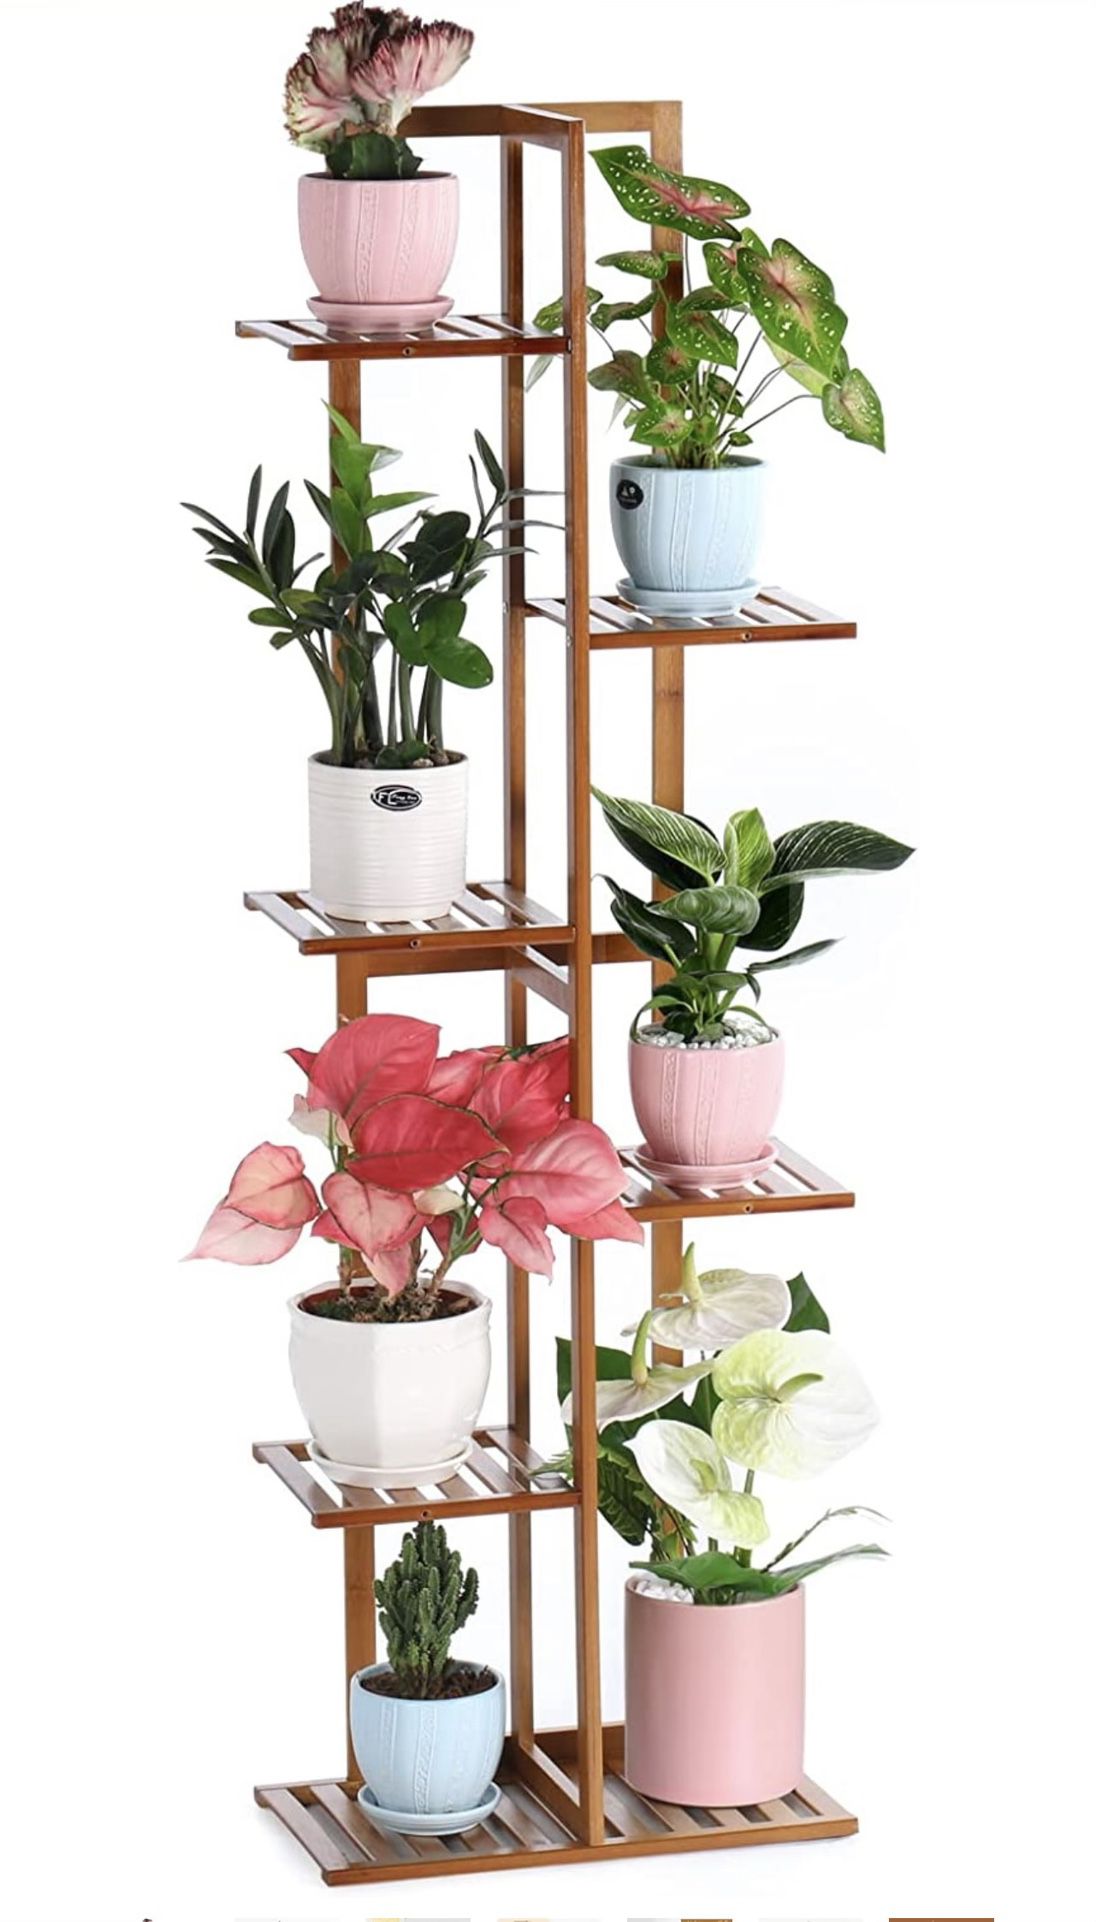 Bamboo Plant Stand 6-7 Tier 